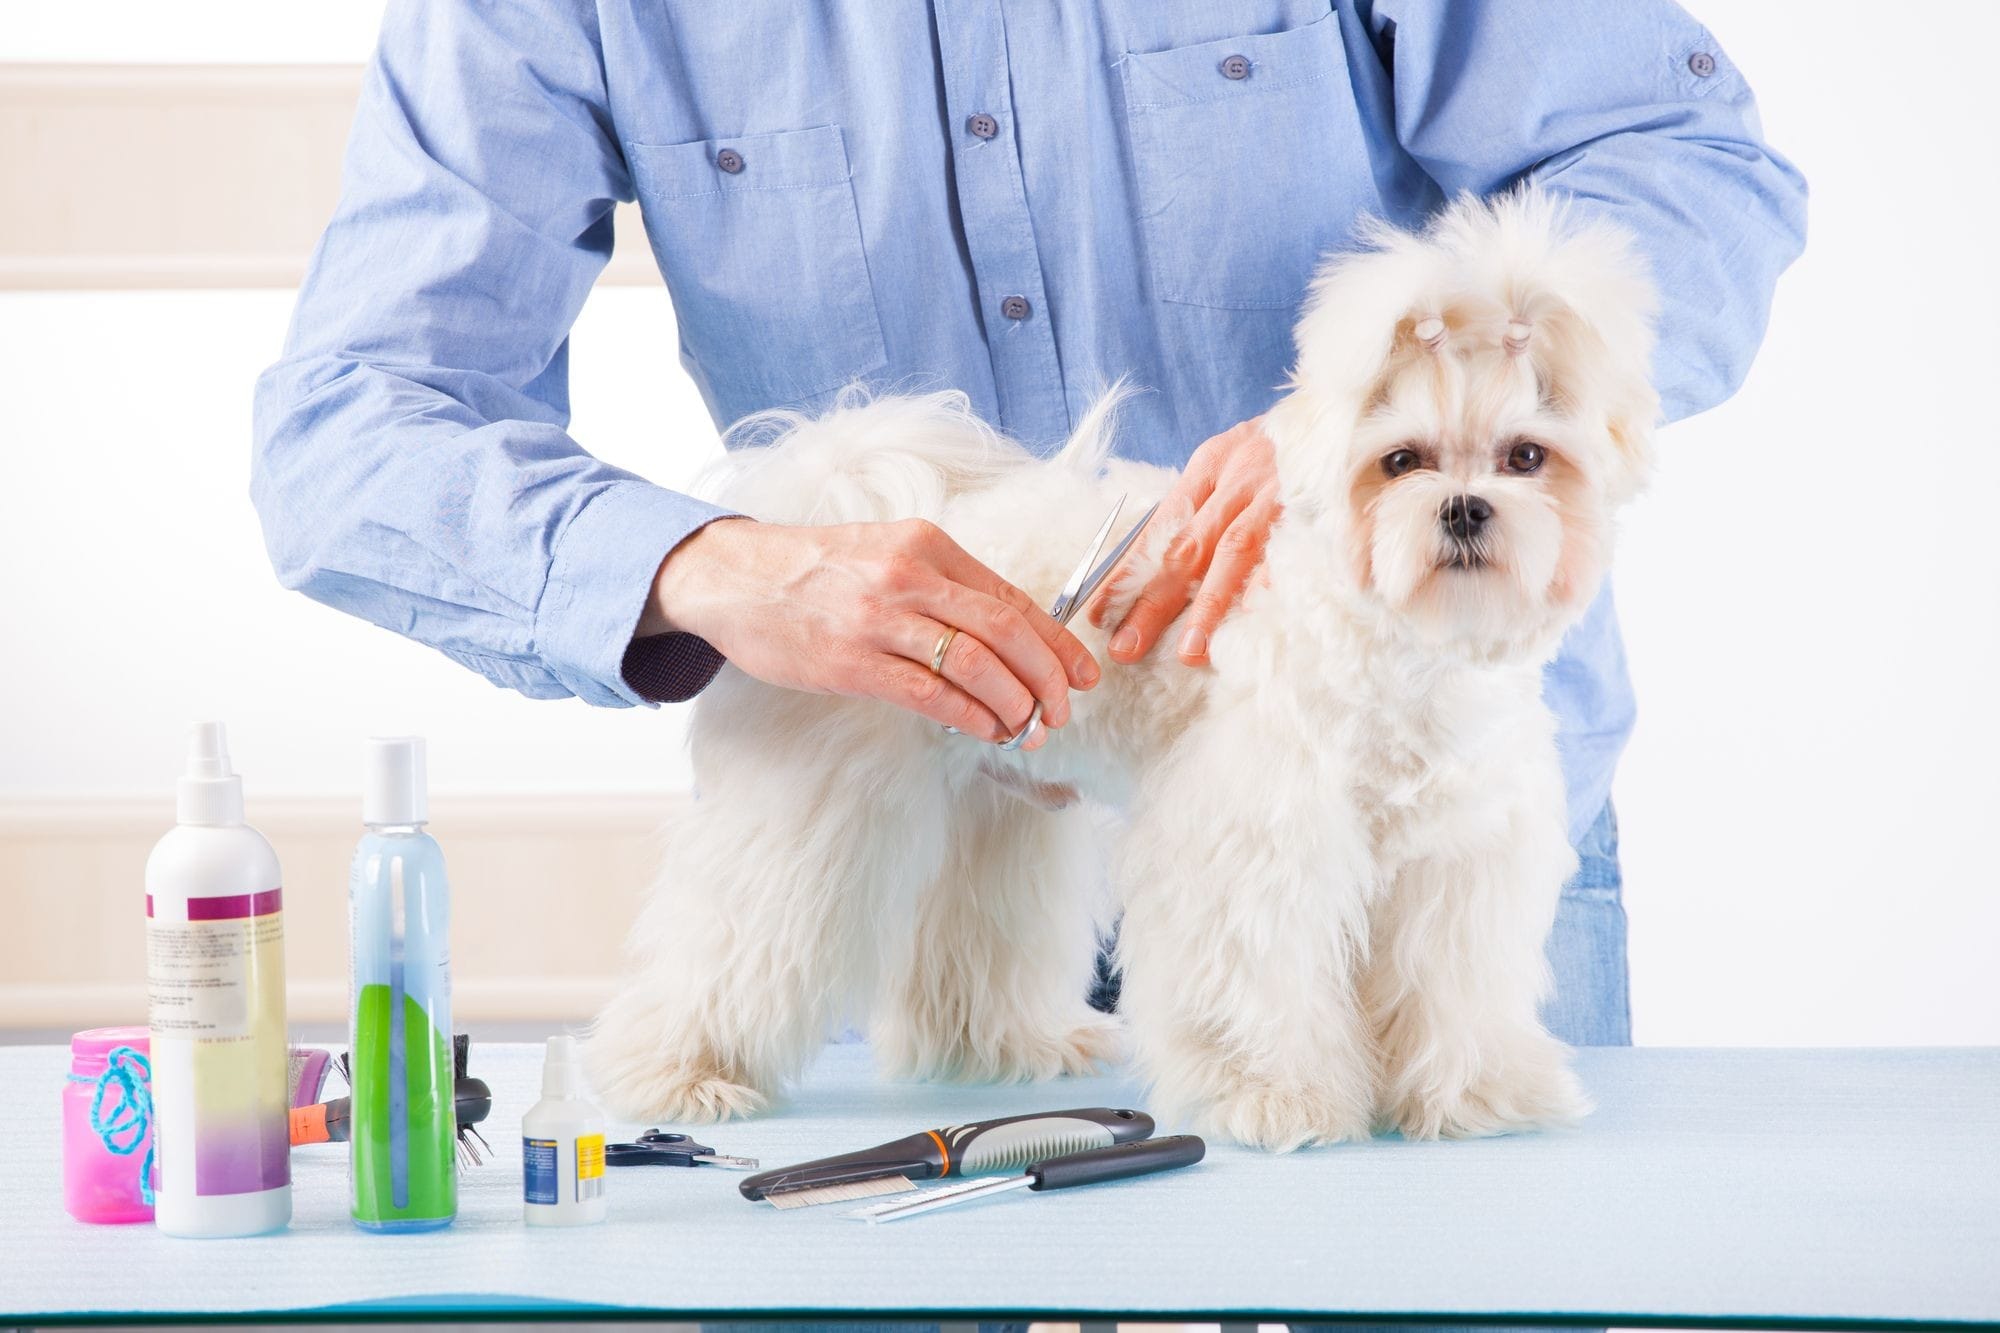 Man Grooming A Dog With Scissors